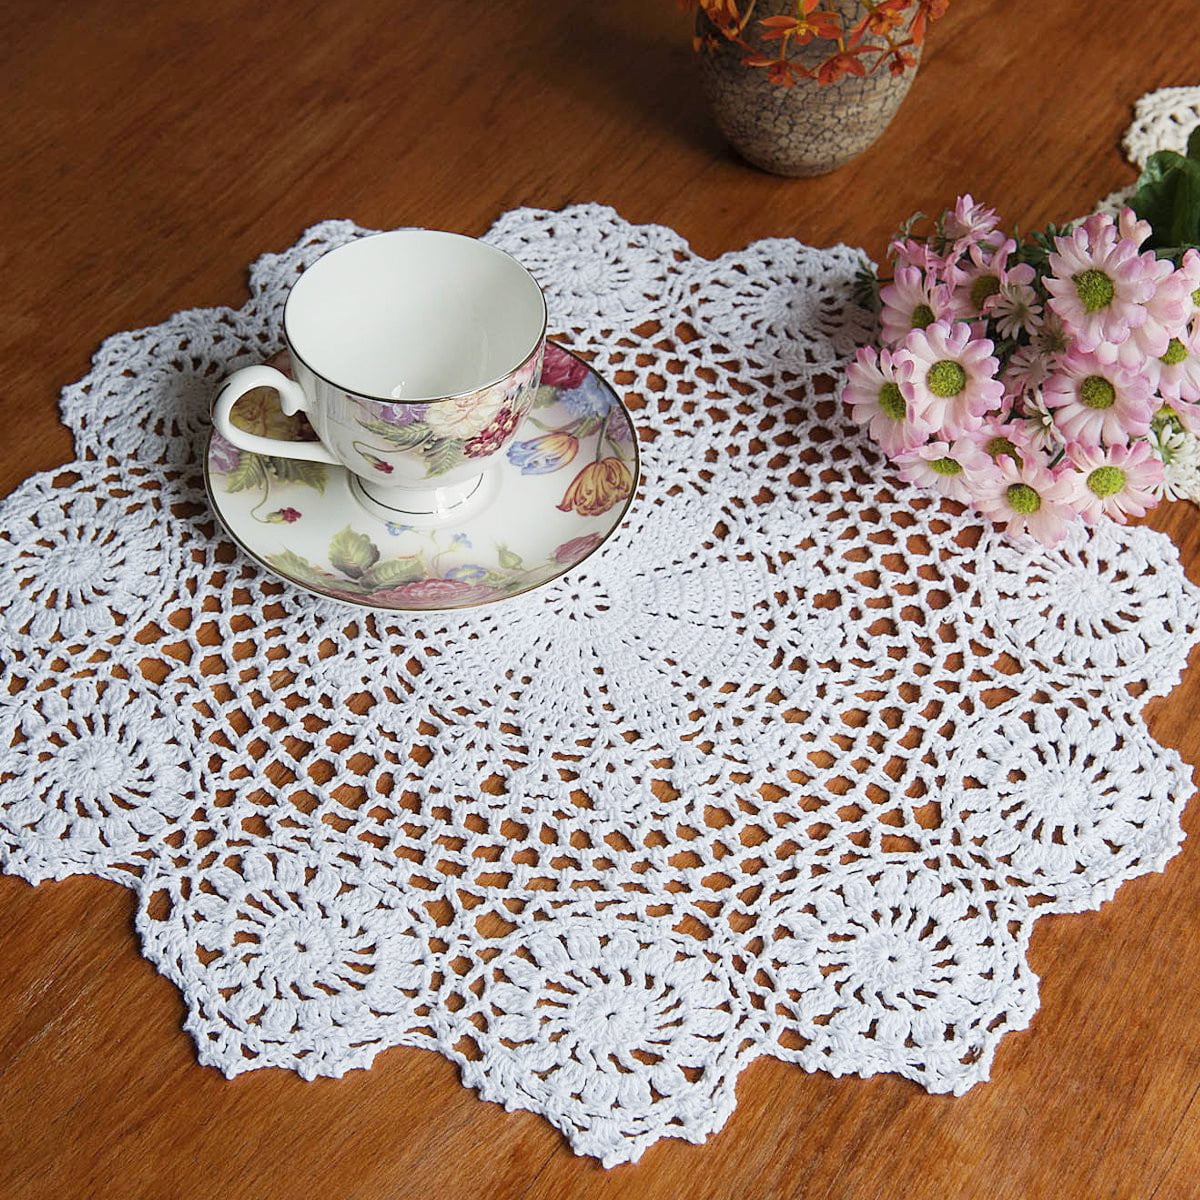 Rose Blush Pink Natural Dyed Doilies Set Of 2 6 Inch Organic Pink Boho Wedding Doilies Tea Party Crafting